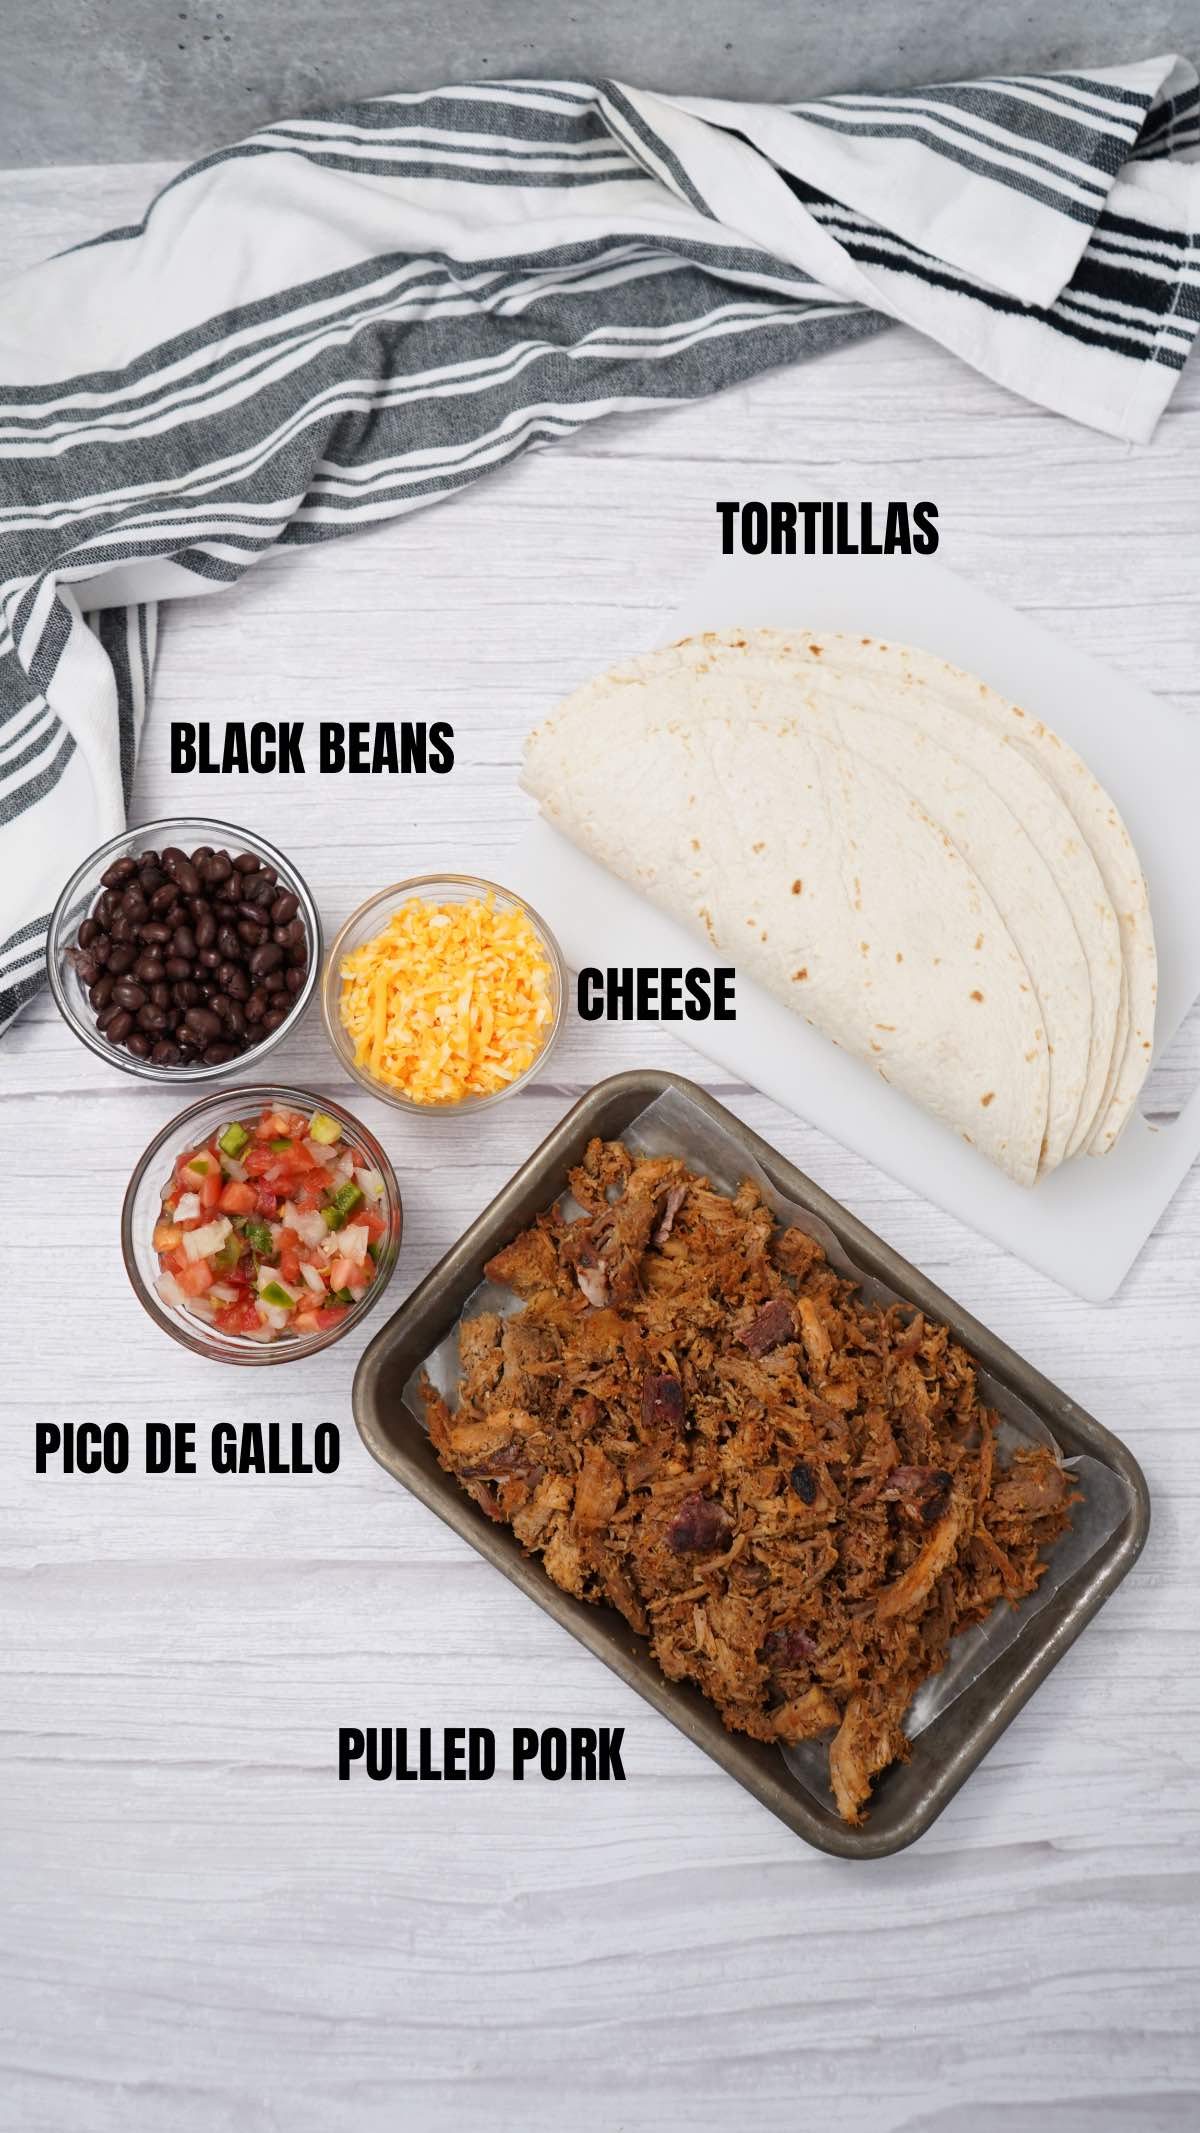 Cheesy Pulled Pork Burrito Ingredients Labeled